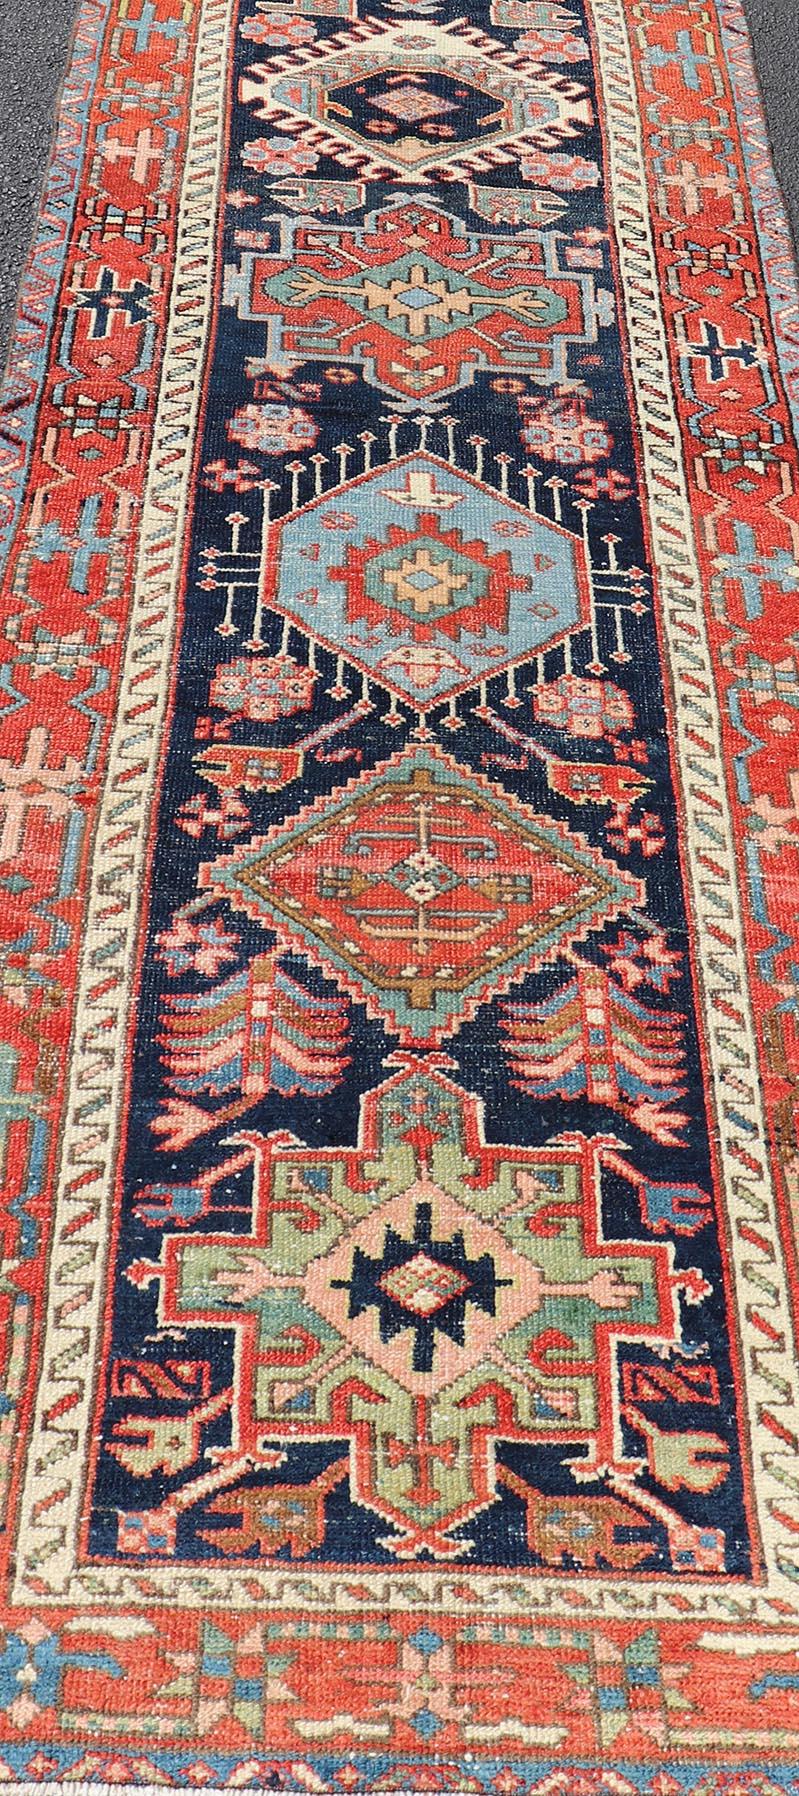 Antique Heriz Serapi Runner with Colorful Highly Stylized Medallion Design. Keivan Woven Arts / rug/EMB-22148-15080, origin/iran Heriz-Serapi / Early 20th Century.
Measures: 3'1 x 13'9 

This magnificent Heriz runner from the early 20th century